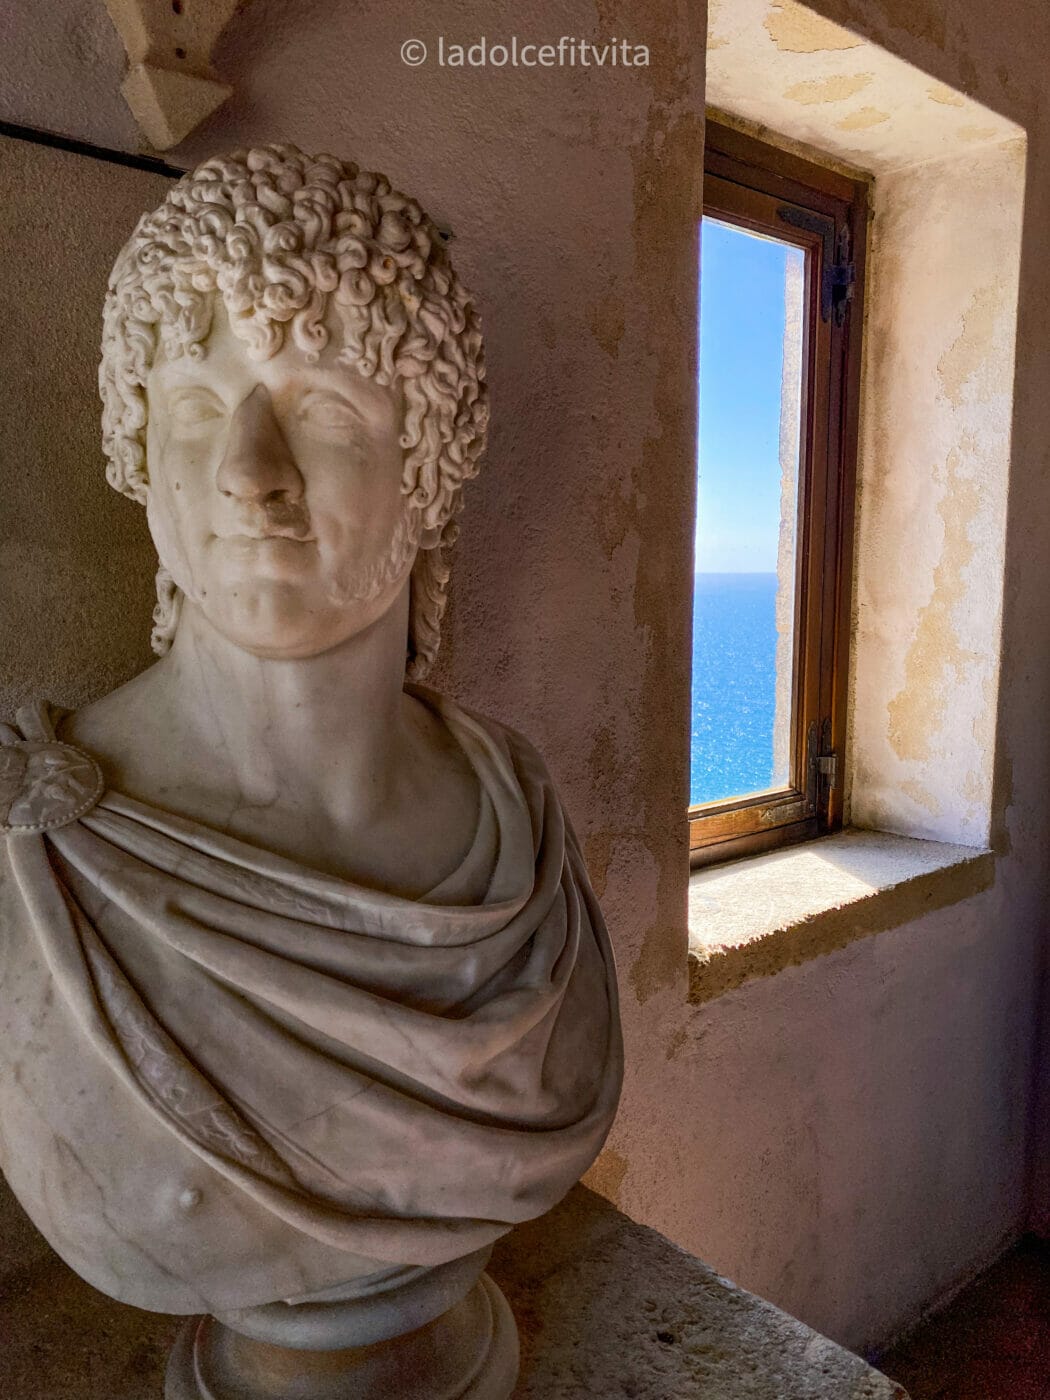 bust marble sculpture in front of a window that looks out on the Tyrrhenian sea in Calabria Italy